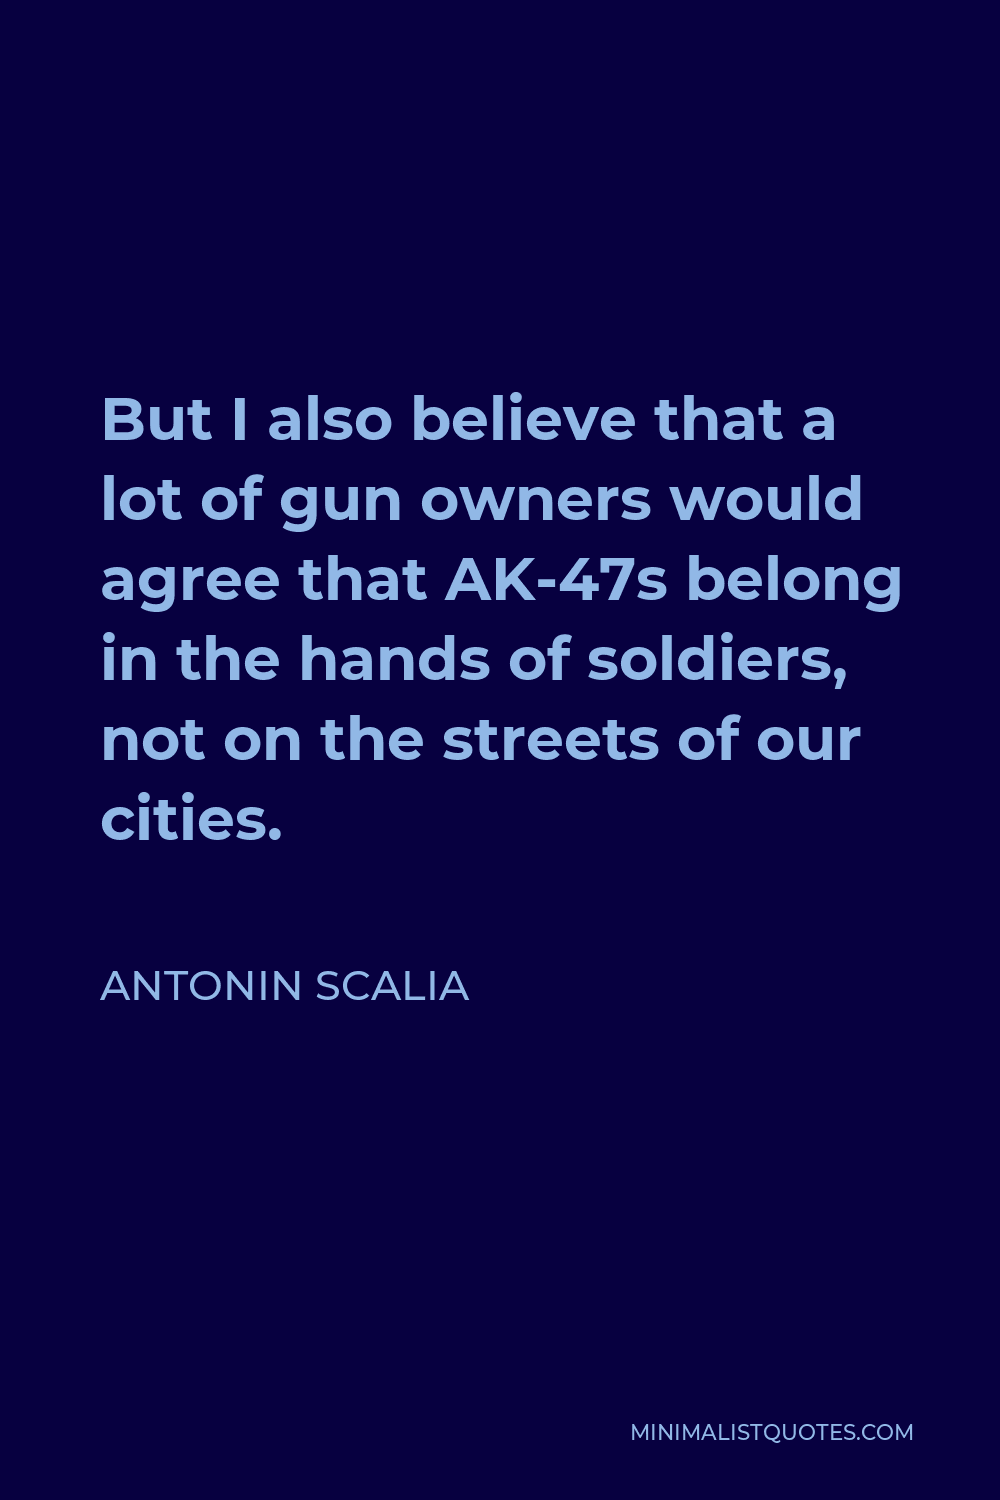 Antonin Scalia Quote - But I also believe that a lot of gun owners would agree that AK-47s belong in the hands of soldiers, not on the streets of our cities.